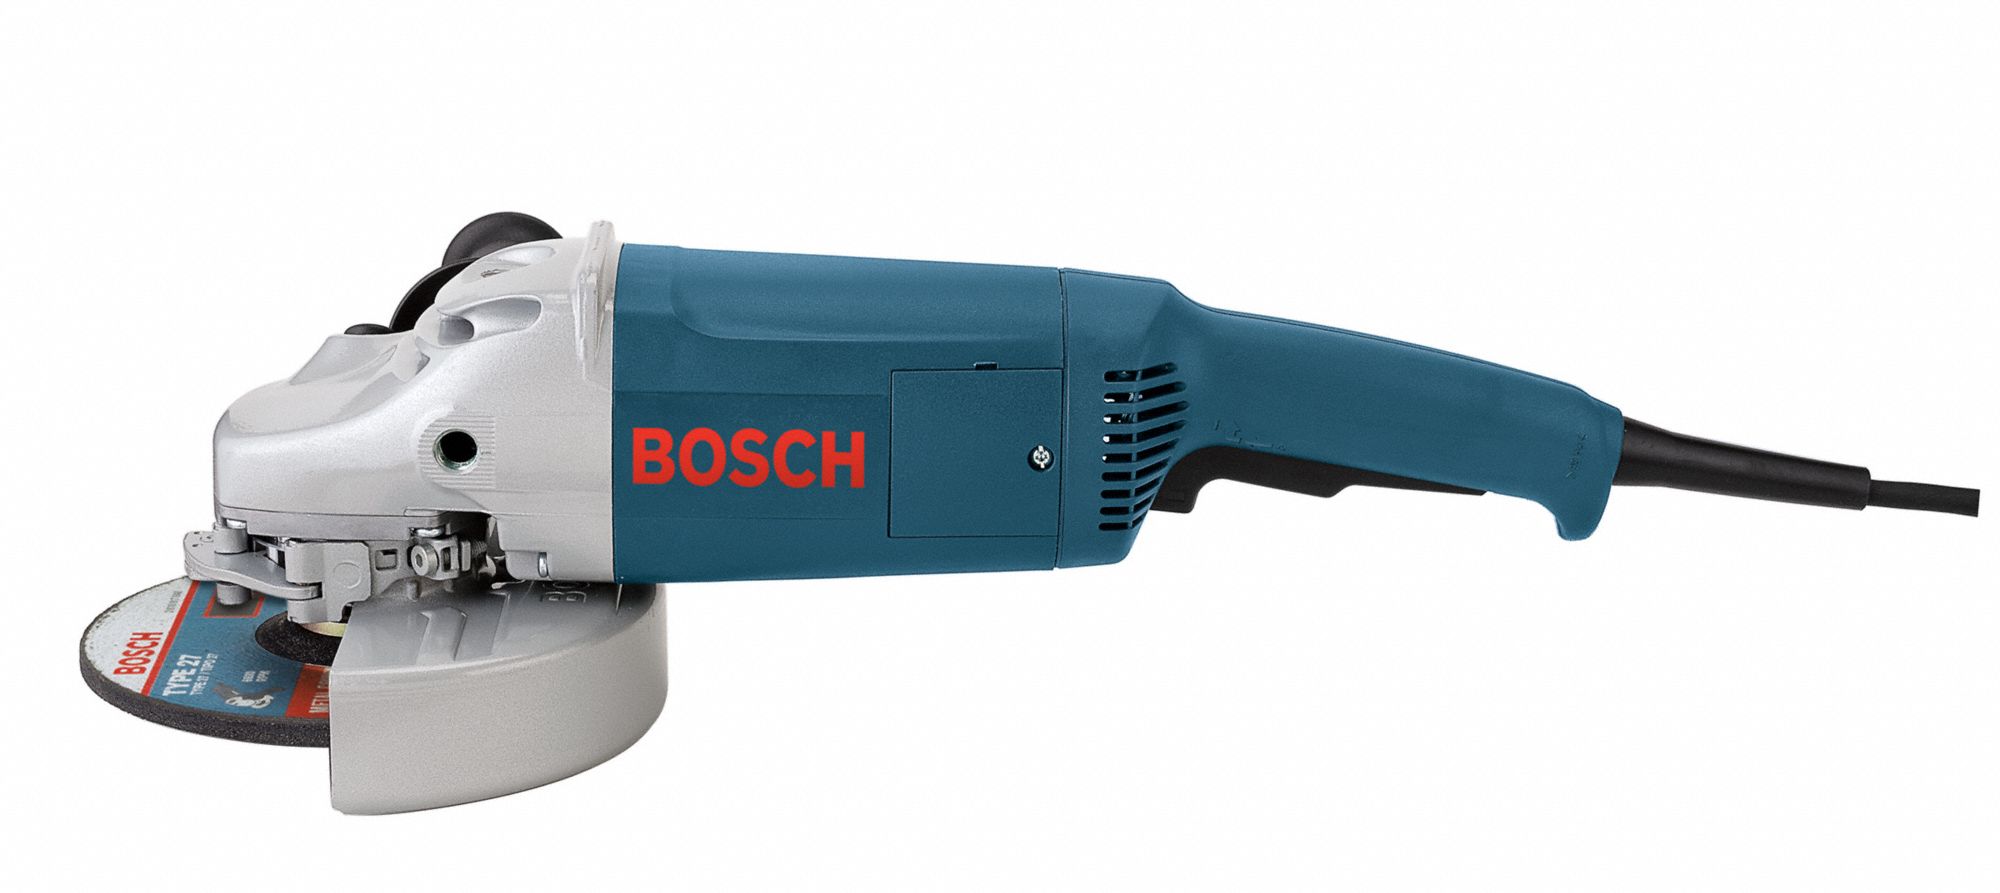 Bosch 1893-6 9 Large Angle Grinder with Rat Tail Handle 